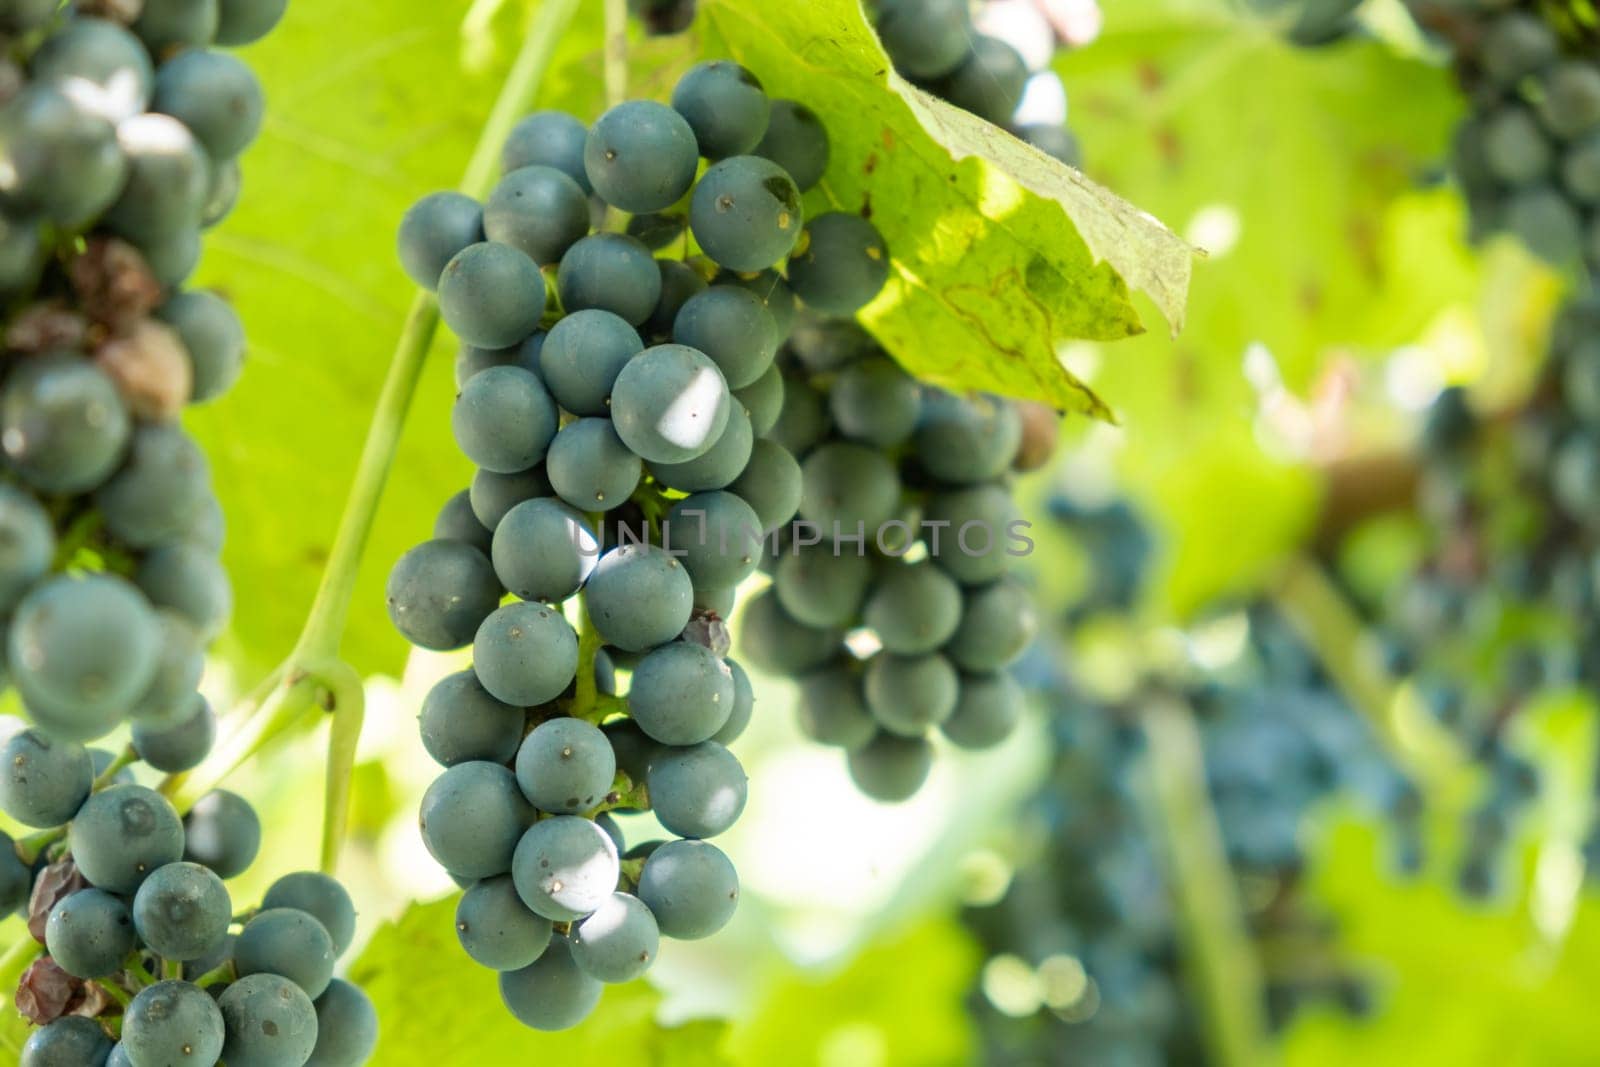 Bunches of black ripe grapes ripen on a branch before wine production in vineyard by vladimka